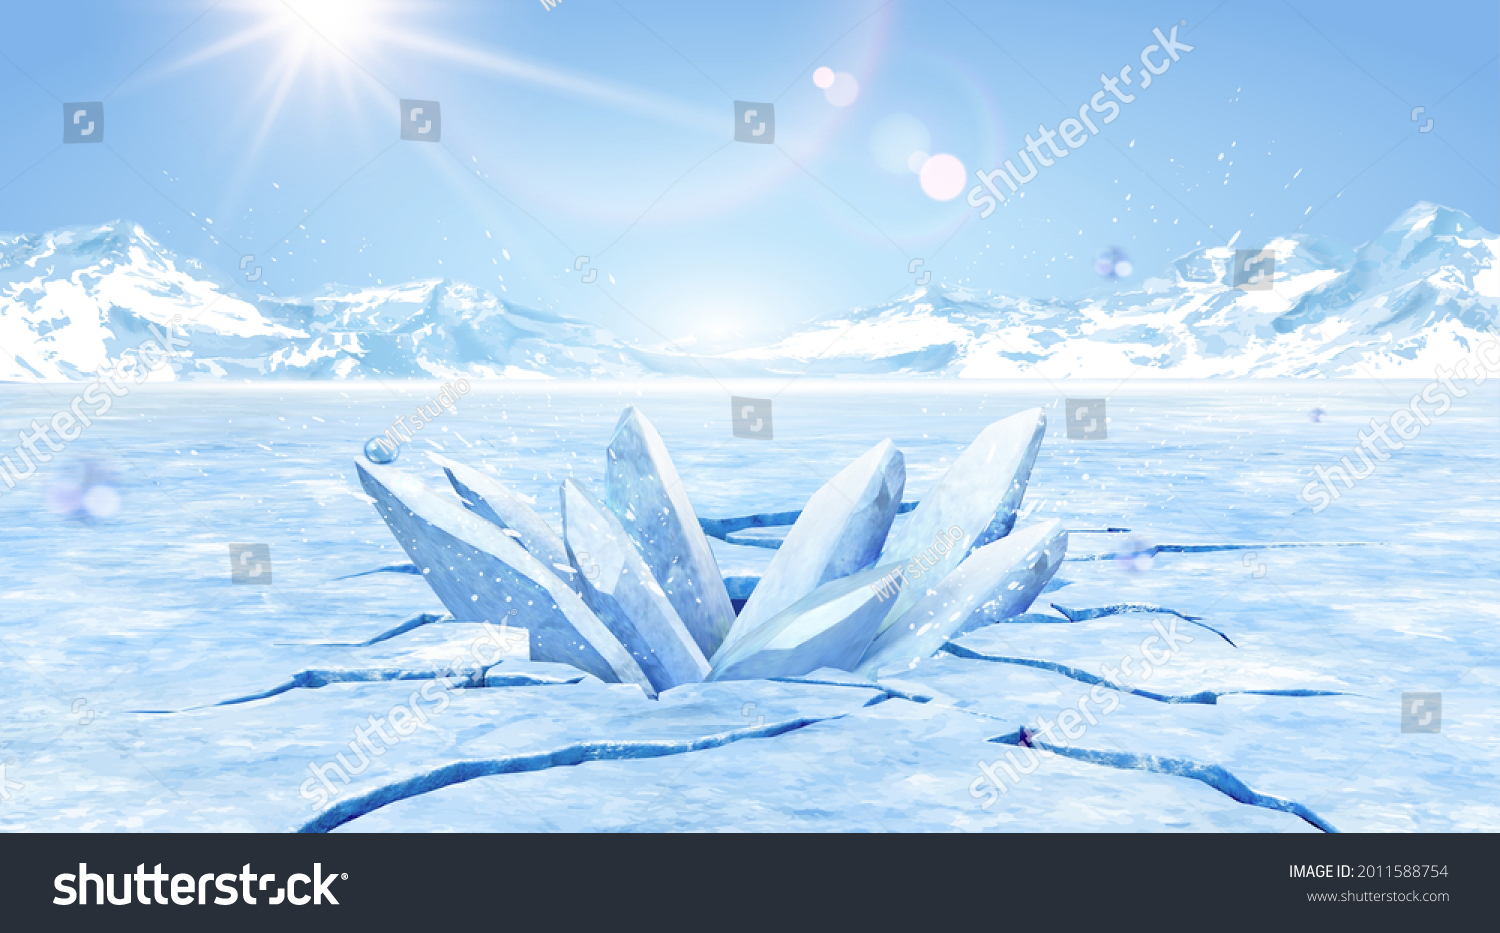 3d glacier scene design with cracked and exploded ice. Blank background suitable for displaying icy product. #2011588754